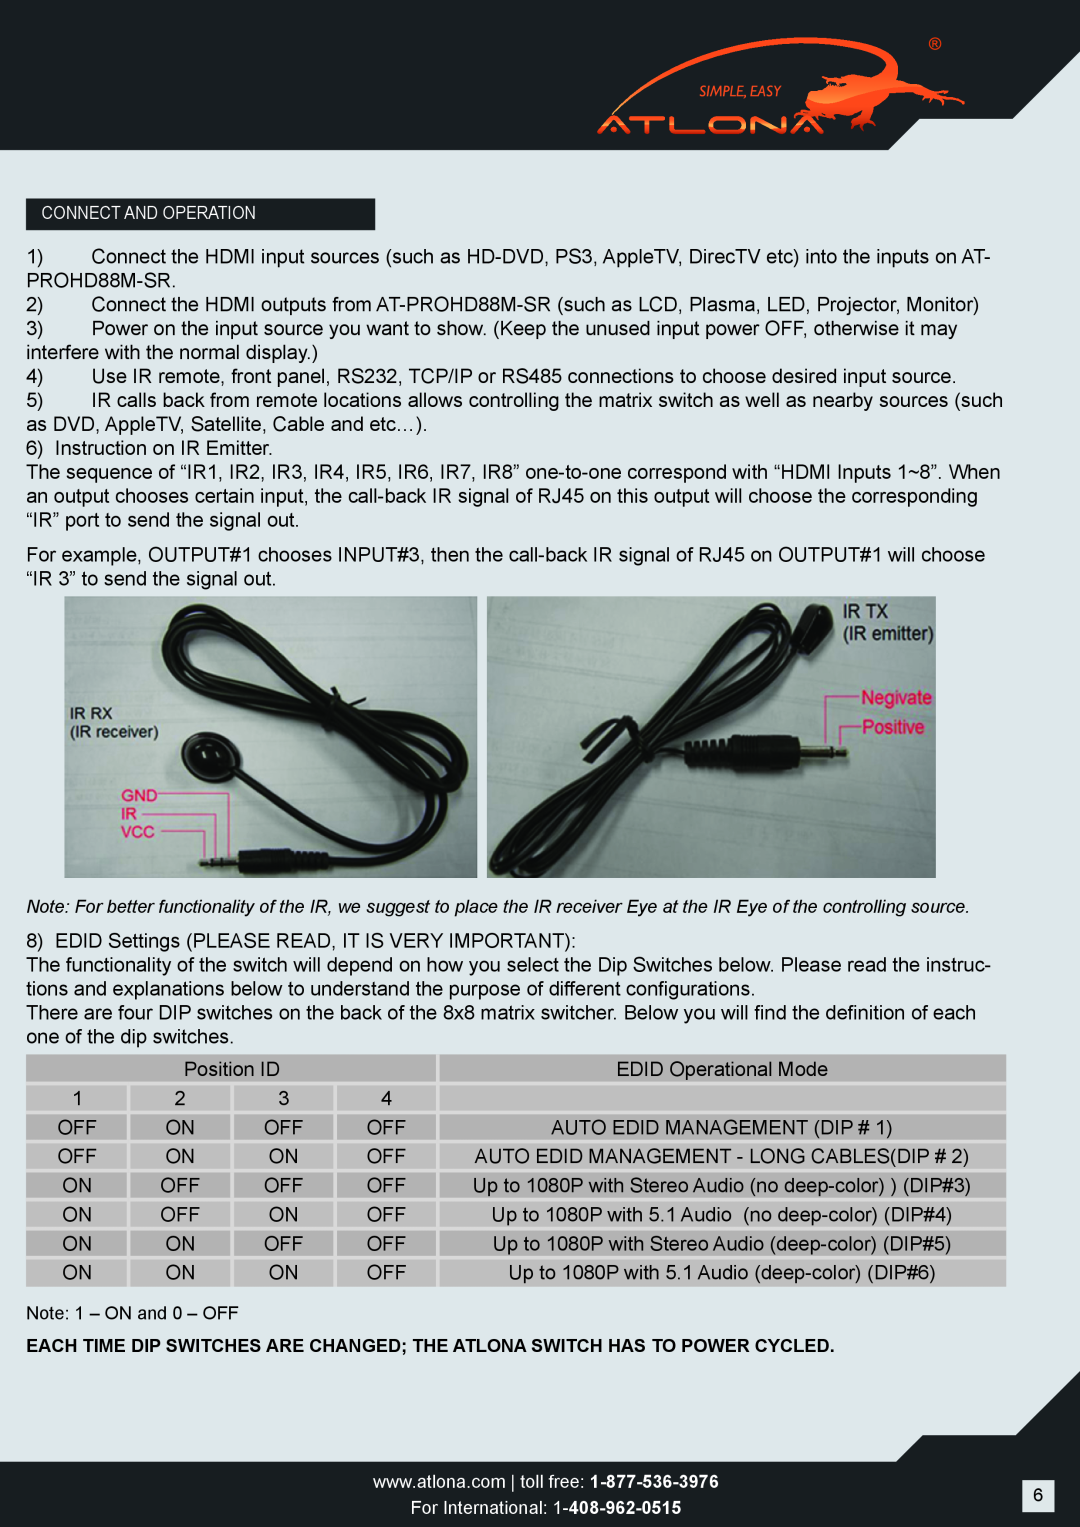 Atlona AT-PROHD88M-SR user manual Note 1 - ON and 0 - OFF 